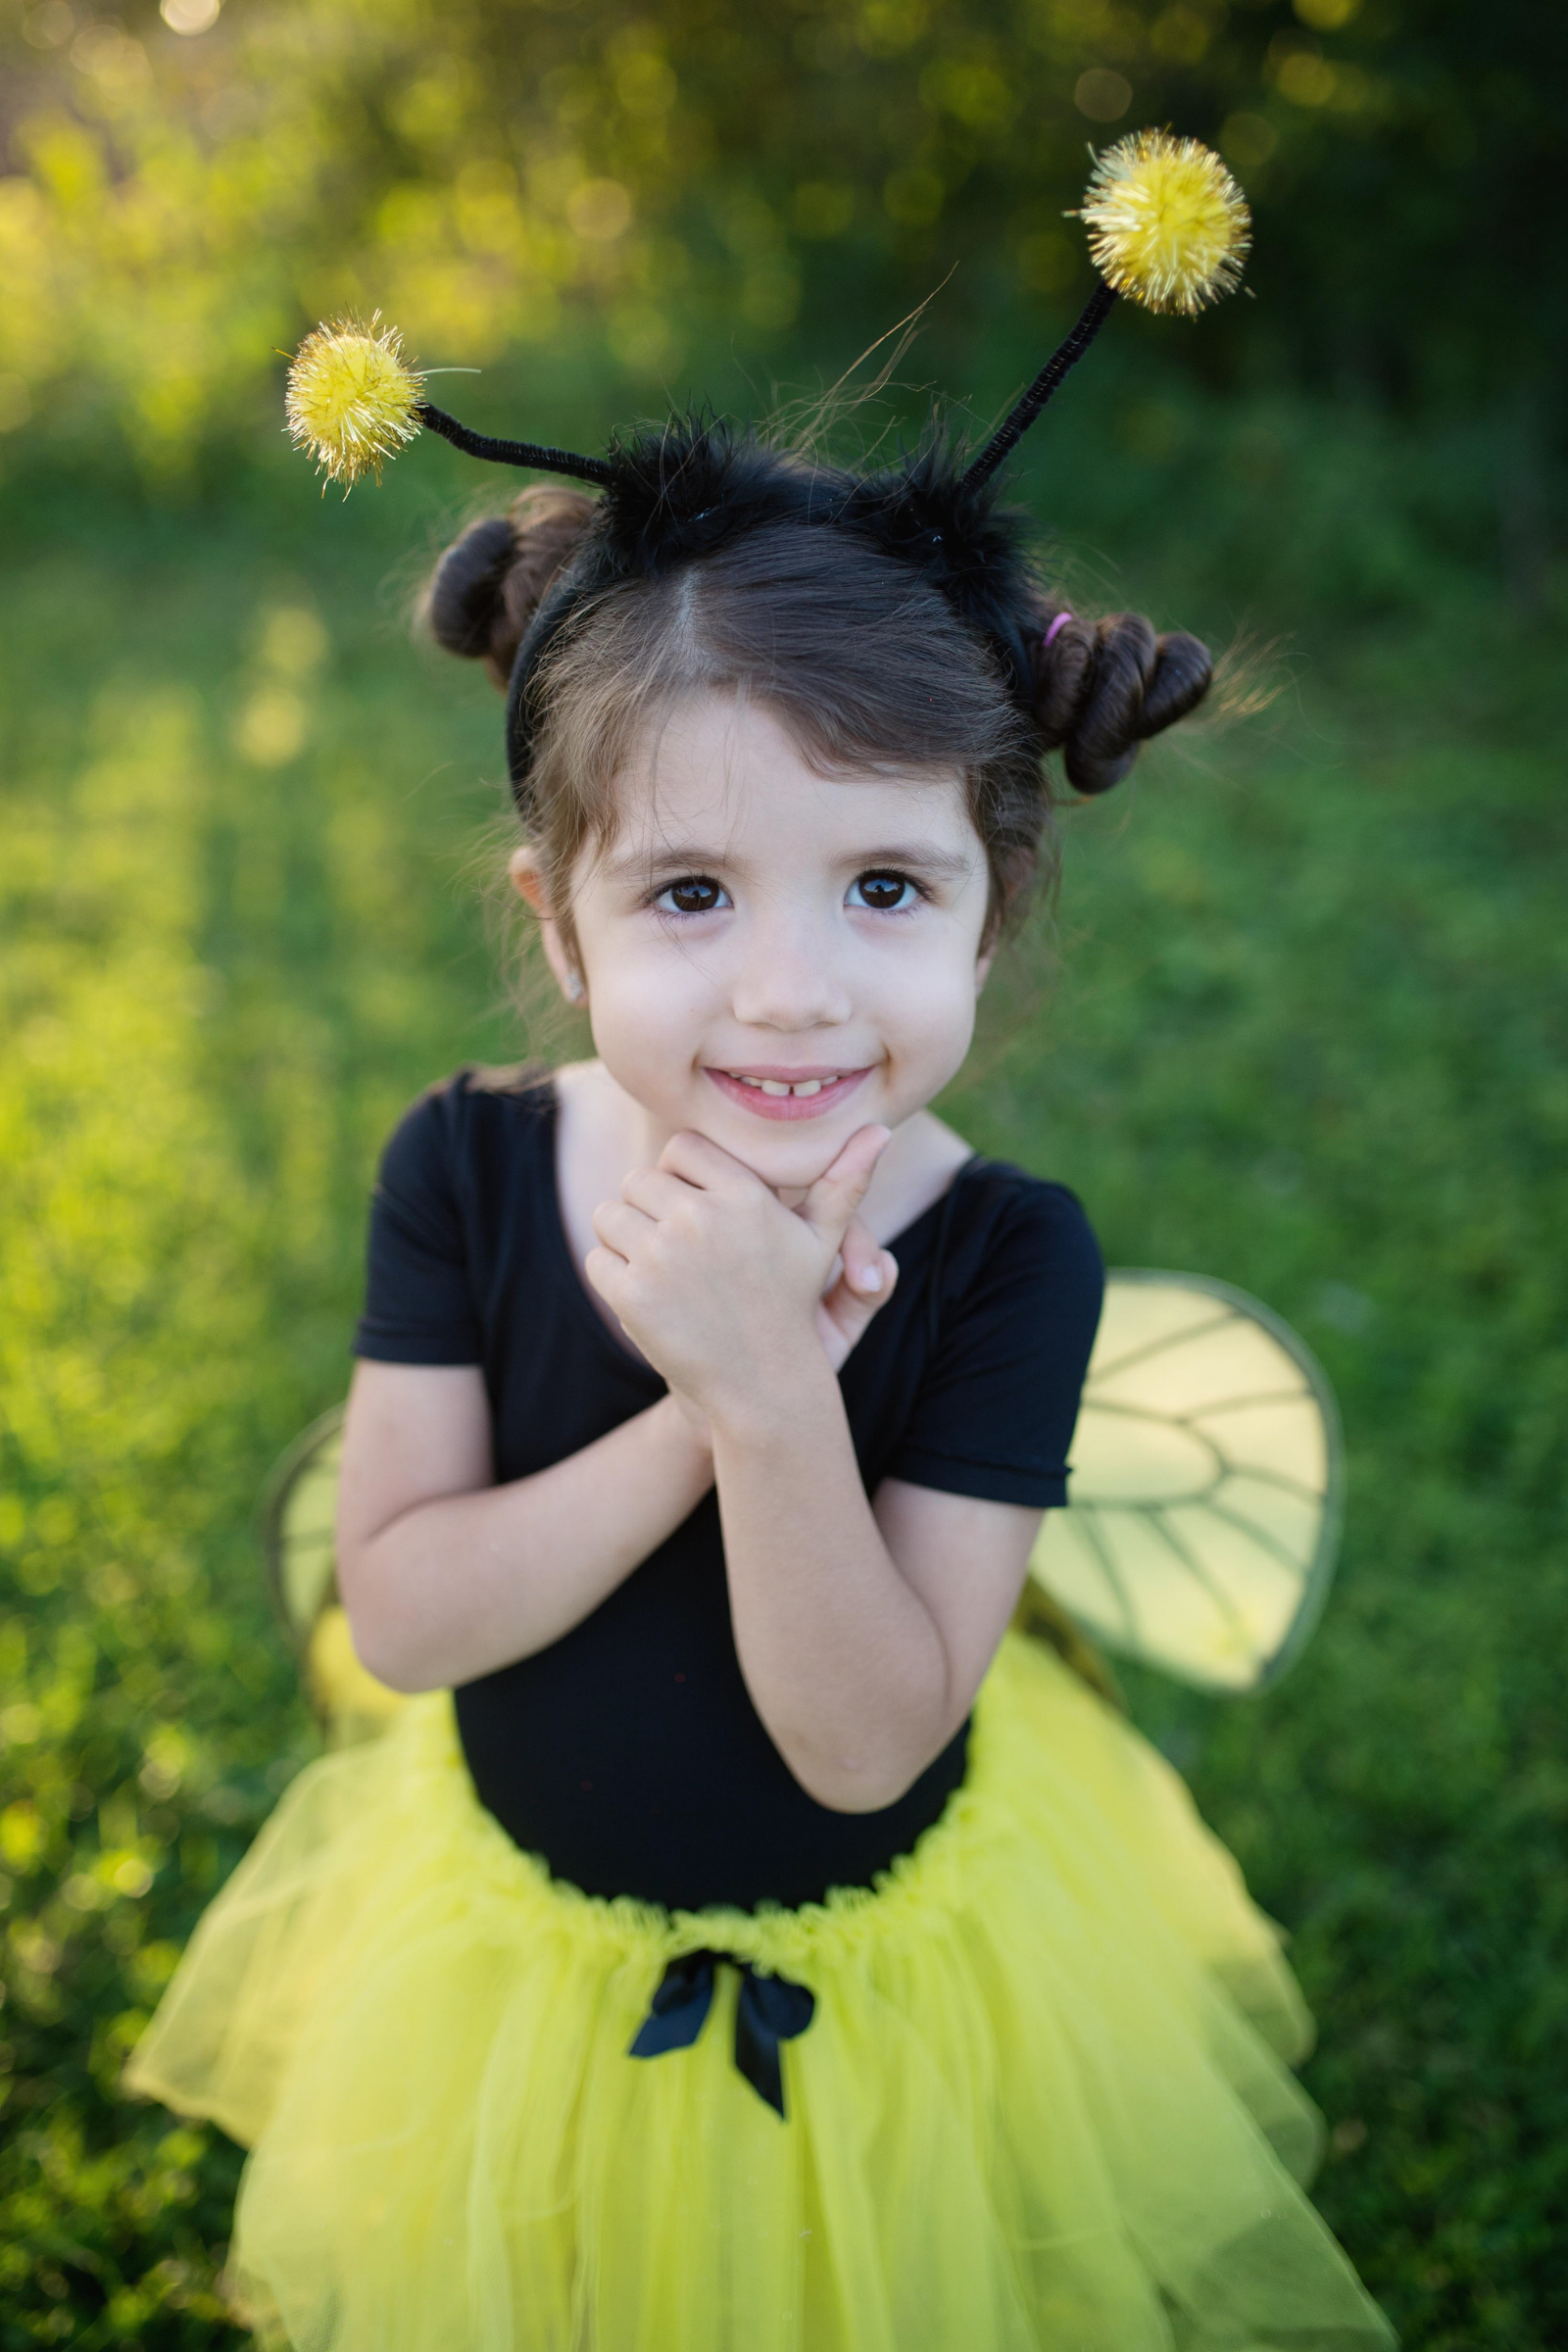 Dress Up Fun! Get the Glitter Bumblebee Set Sizes 4-6 for Your Kids Now! -  Bellaboo